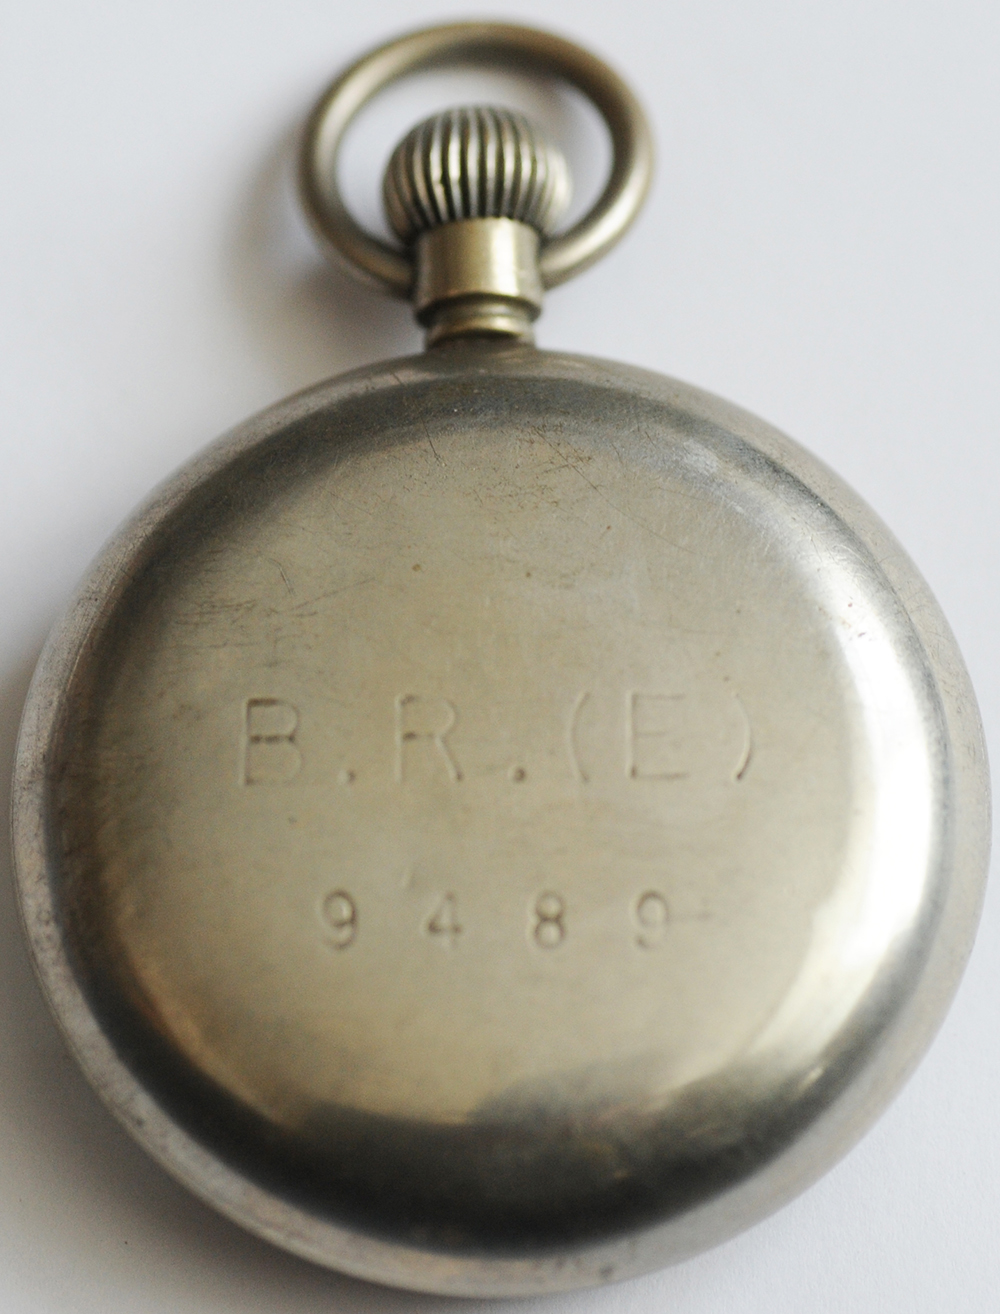 BR(E) Pocketwatch engraved on rear 'B.R.(E) 9489'.Swiss Made Tissot Antimagnetique with second